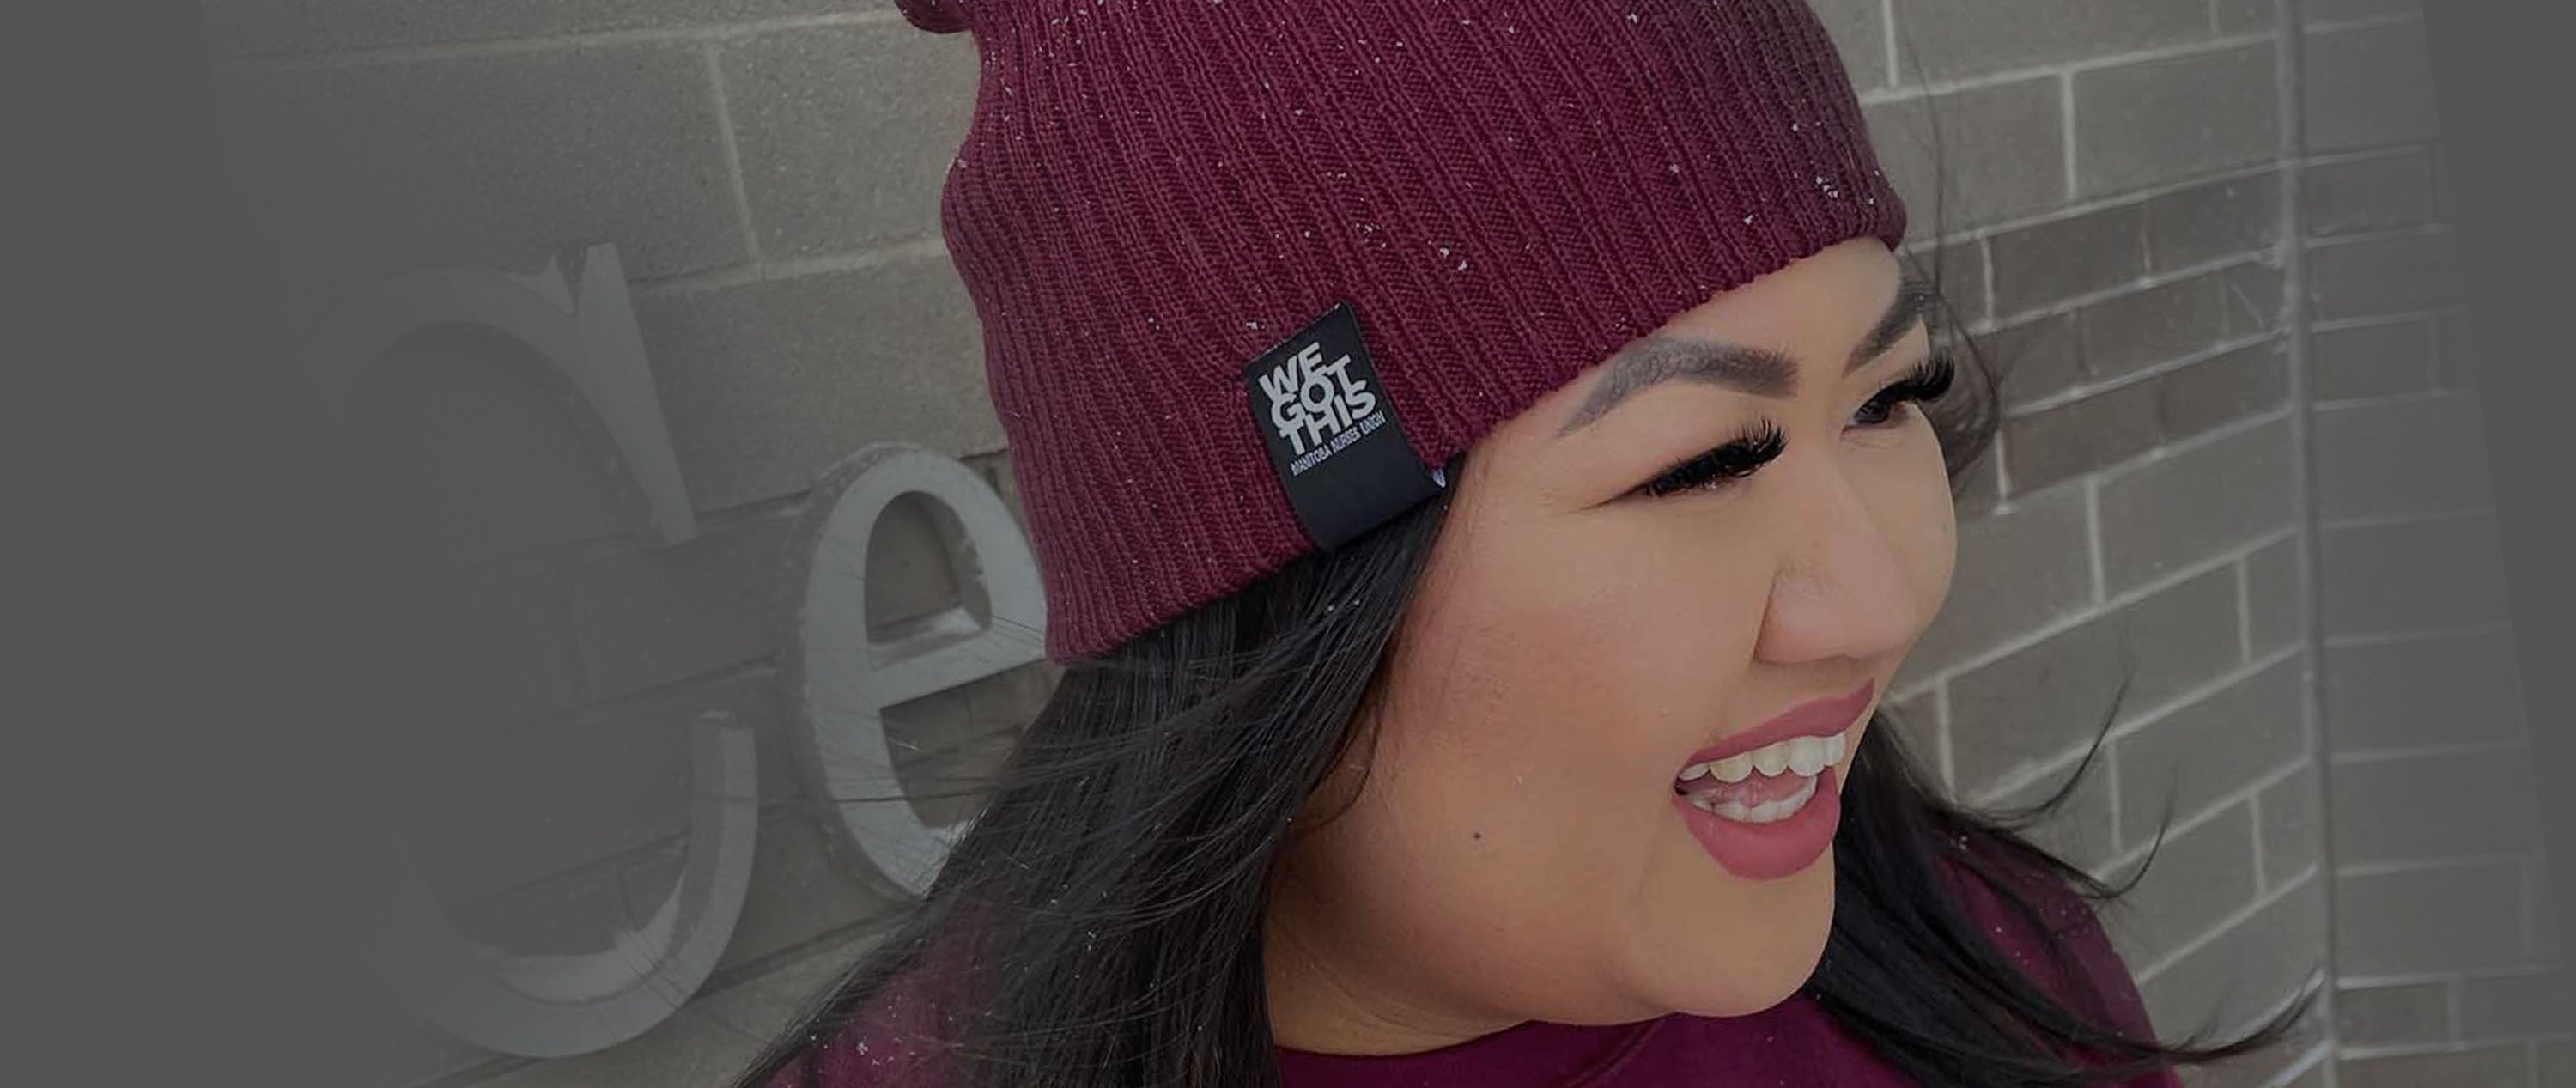 Smiling woman wearing a merlot coloured beanie toque with "We Got This" slogan on tag.